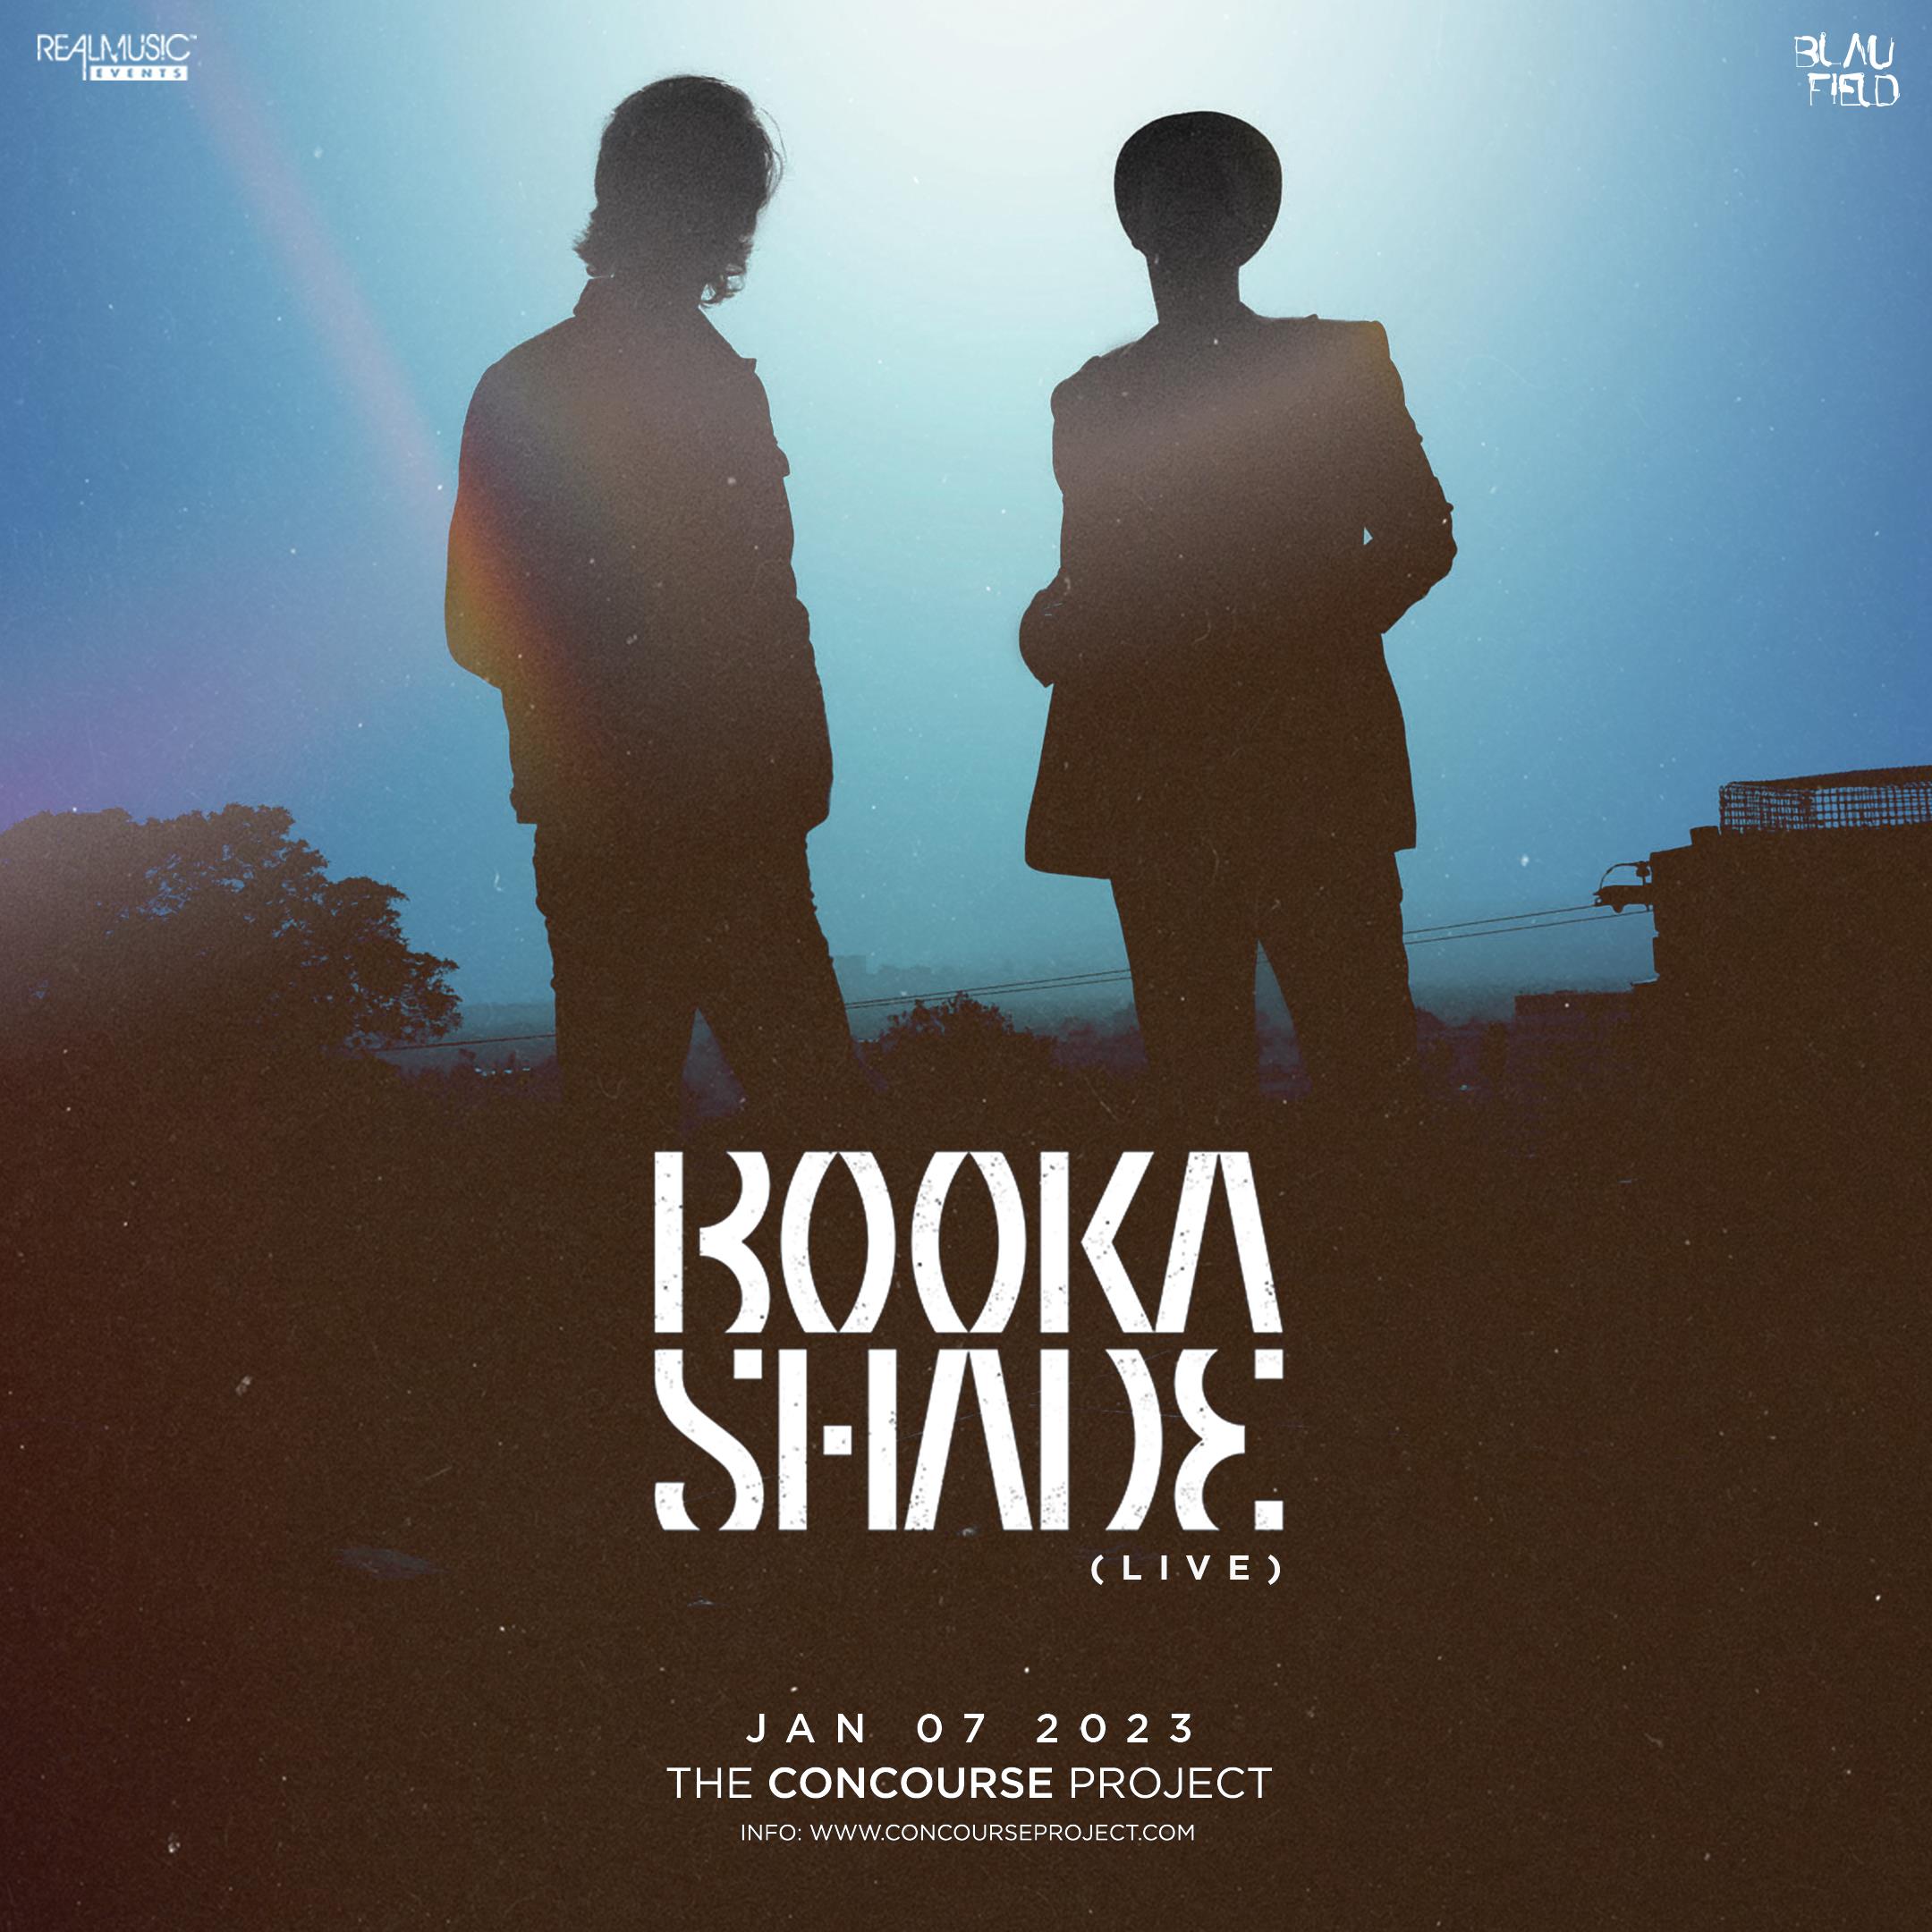 Booka Shade (Live) at The Concourse Project